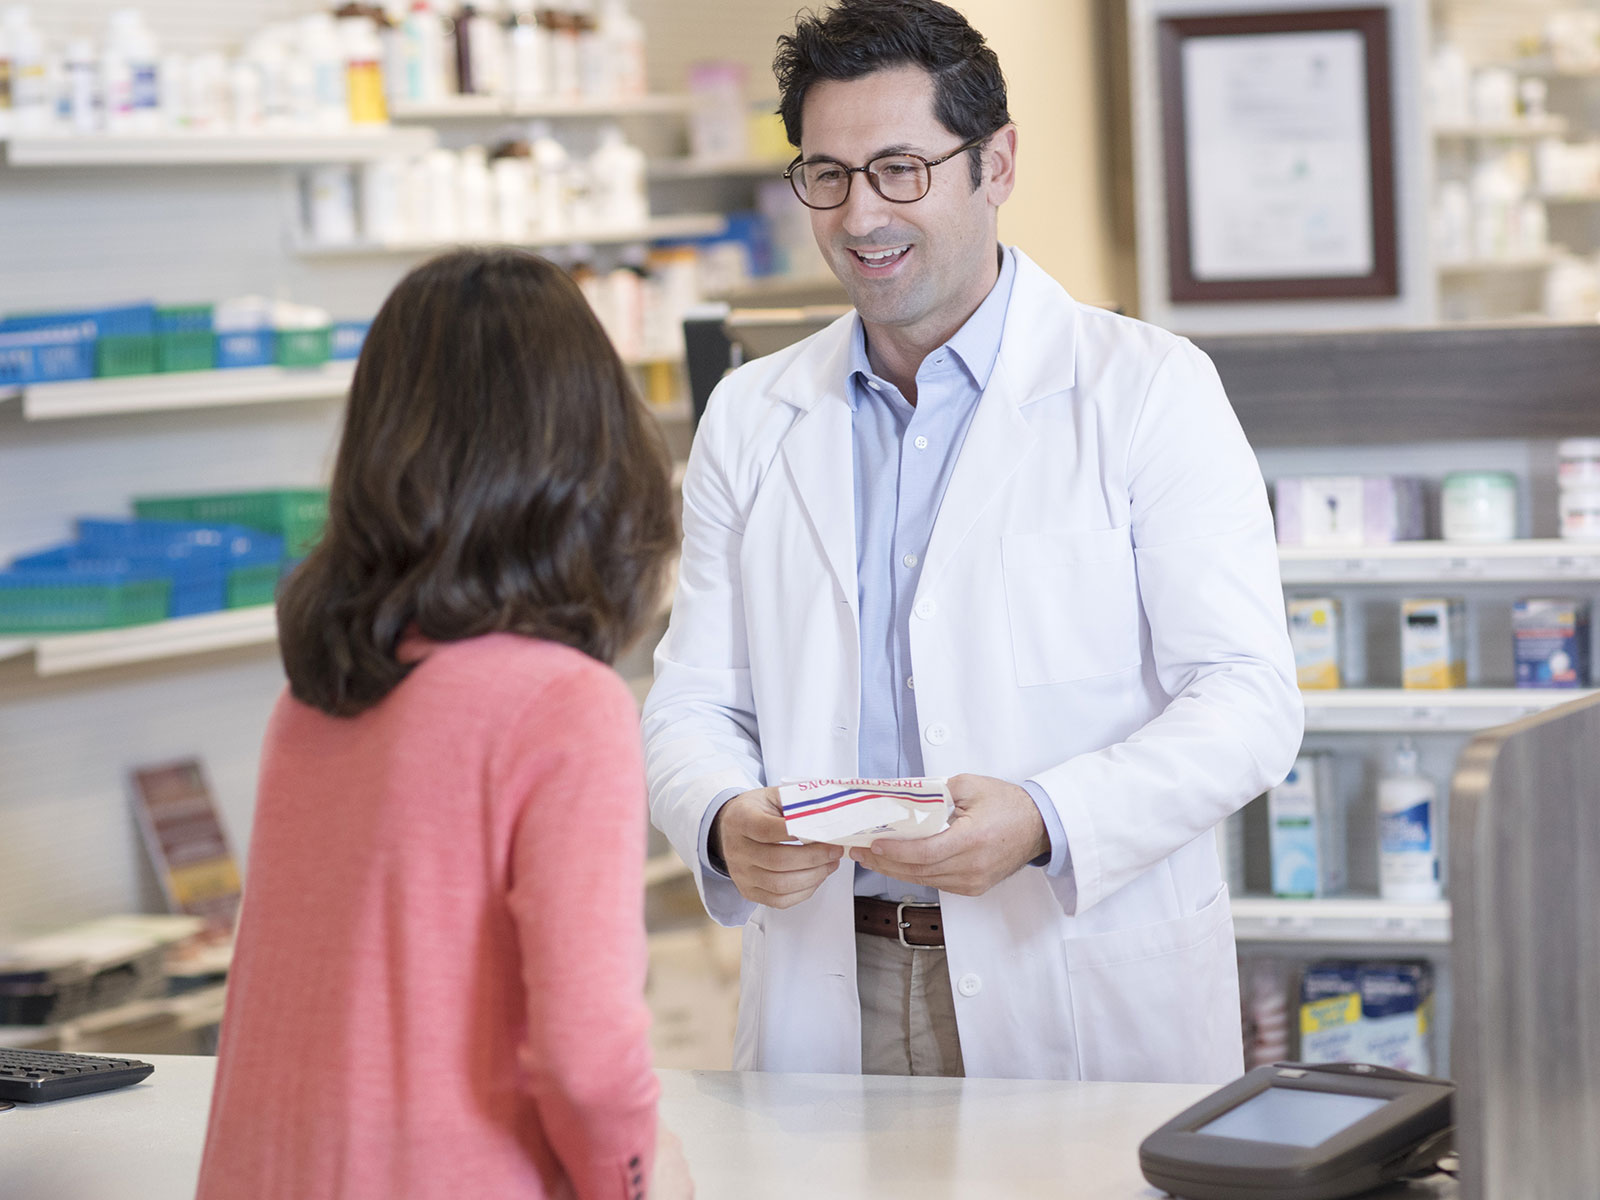 Male pharmacist helps female customer at counter.